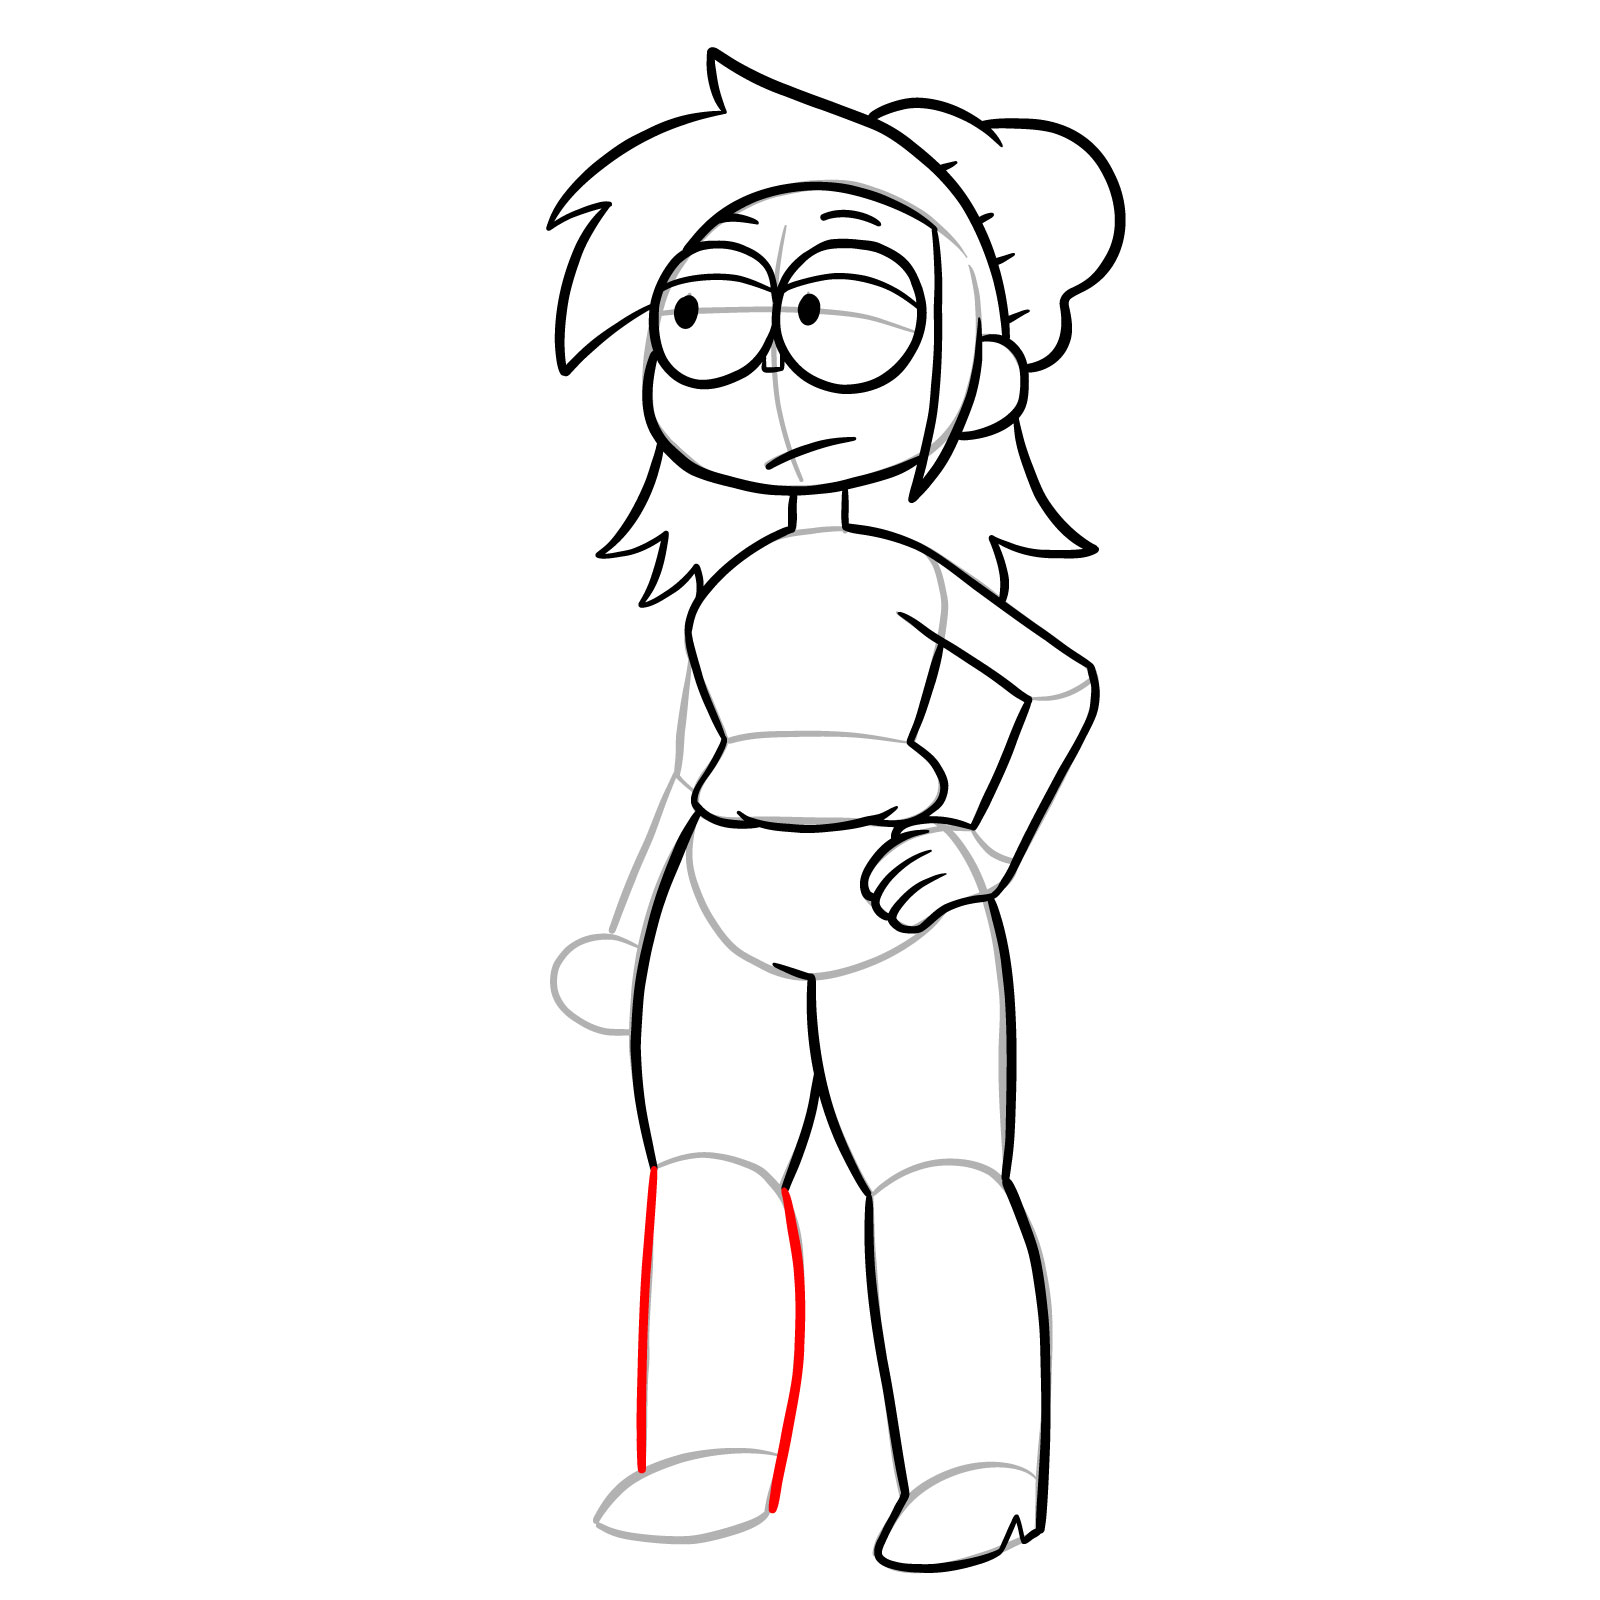 How to draw Actor Enid from OK K.O.! - step 20